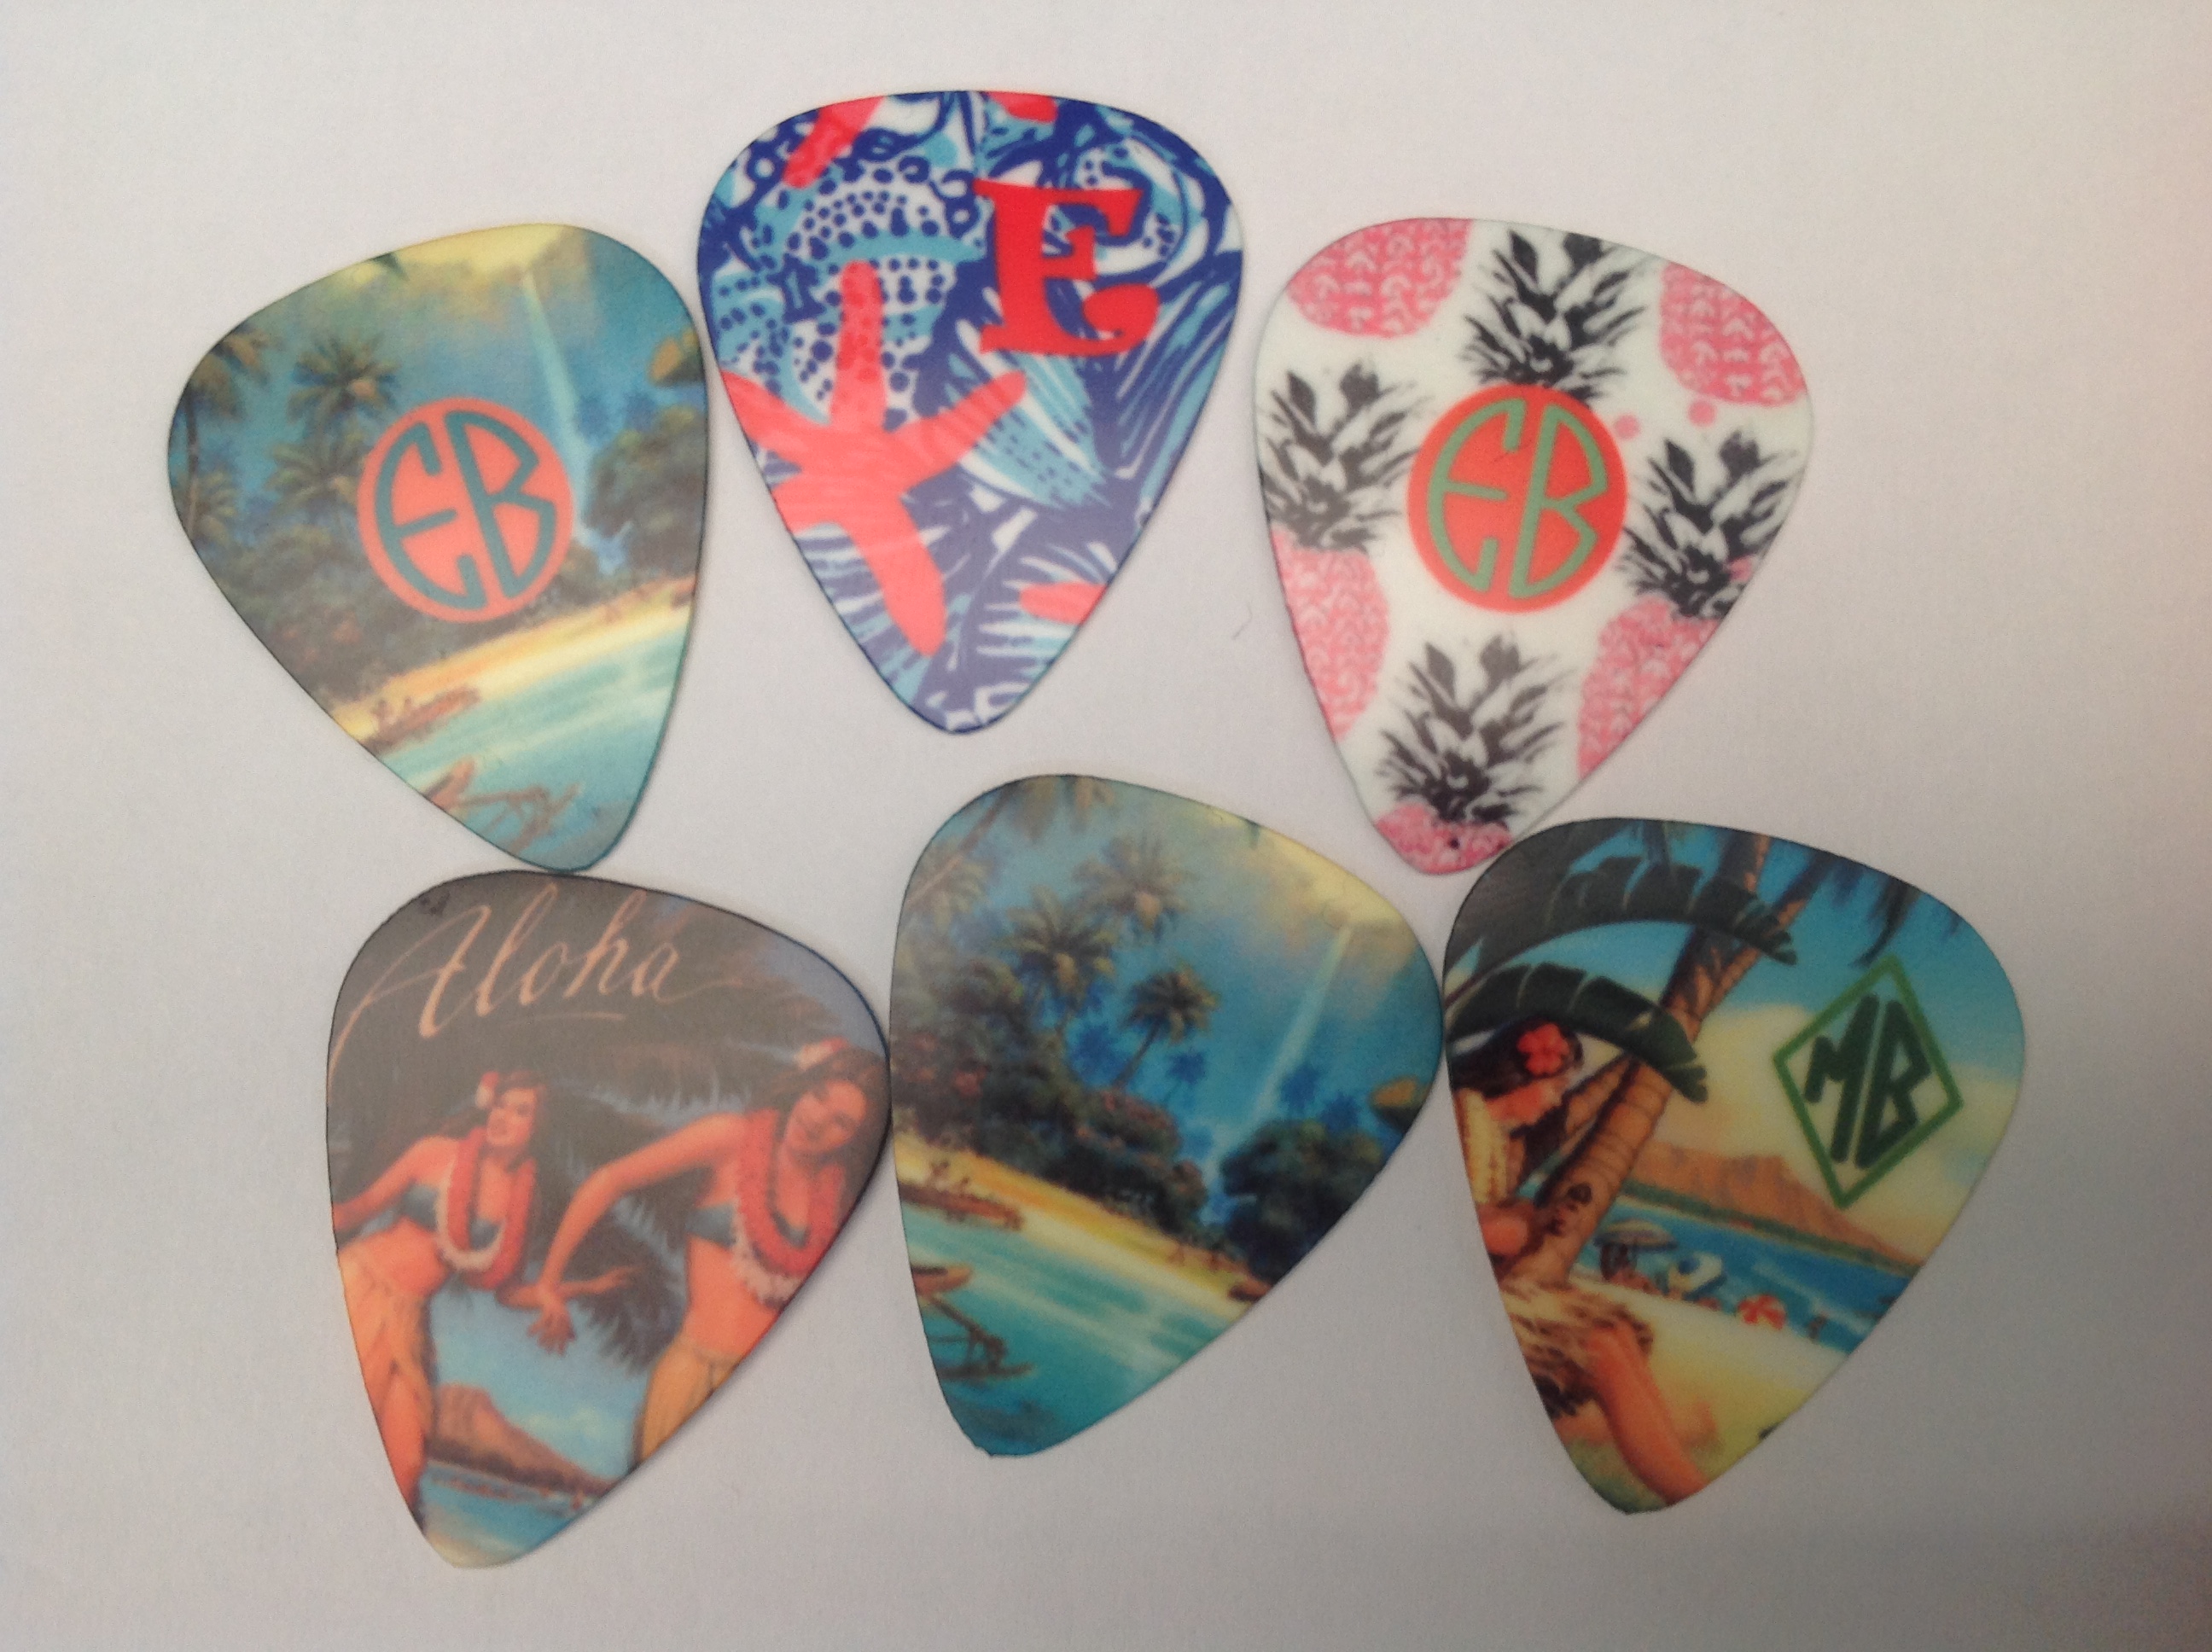 Themed Guitar Picks made with sublimation printing